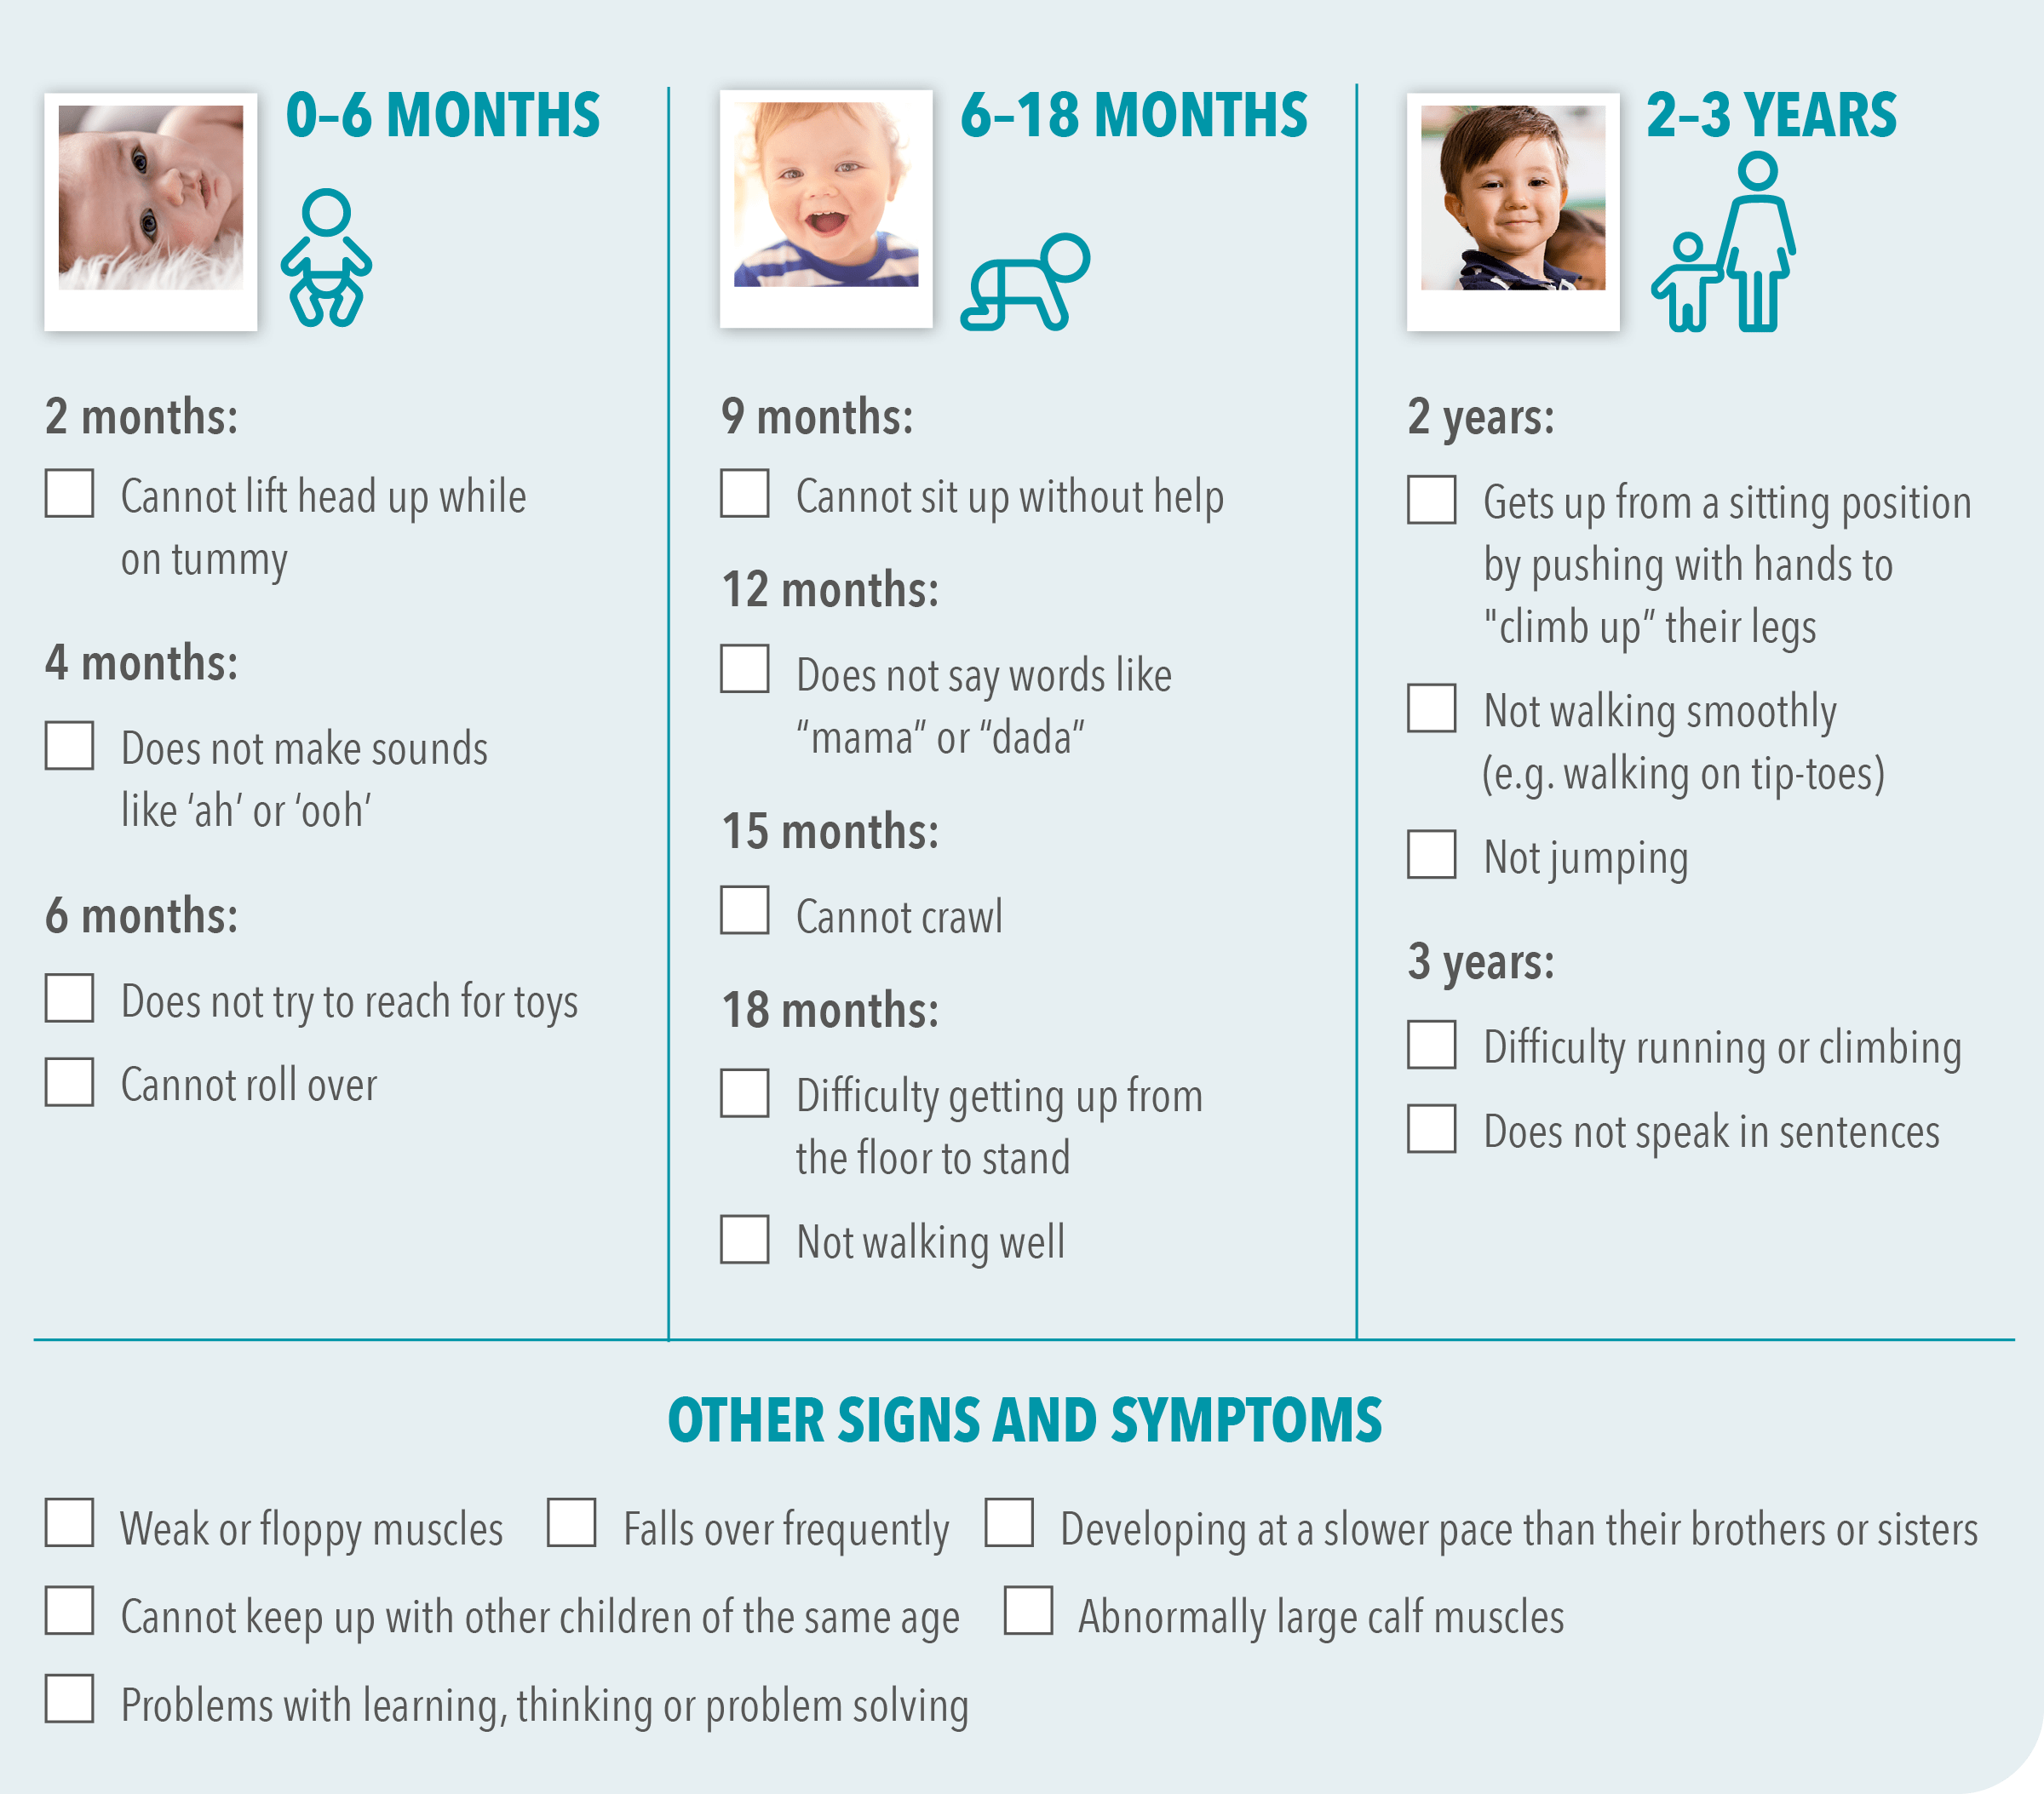 Checklist of the DMD symptoms from 2 months–3 years